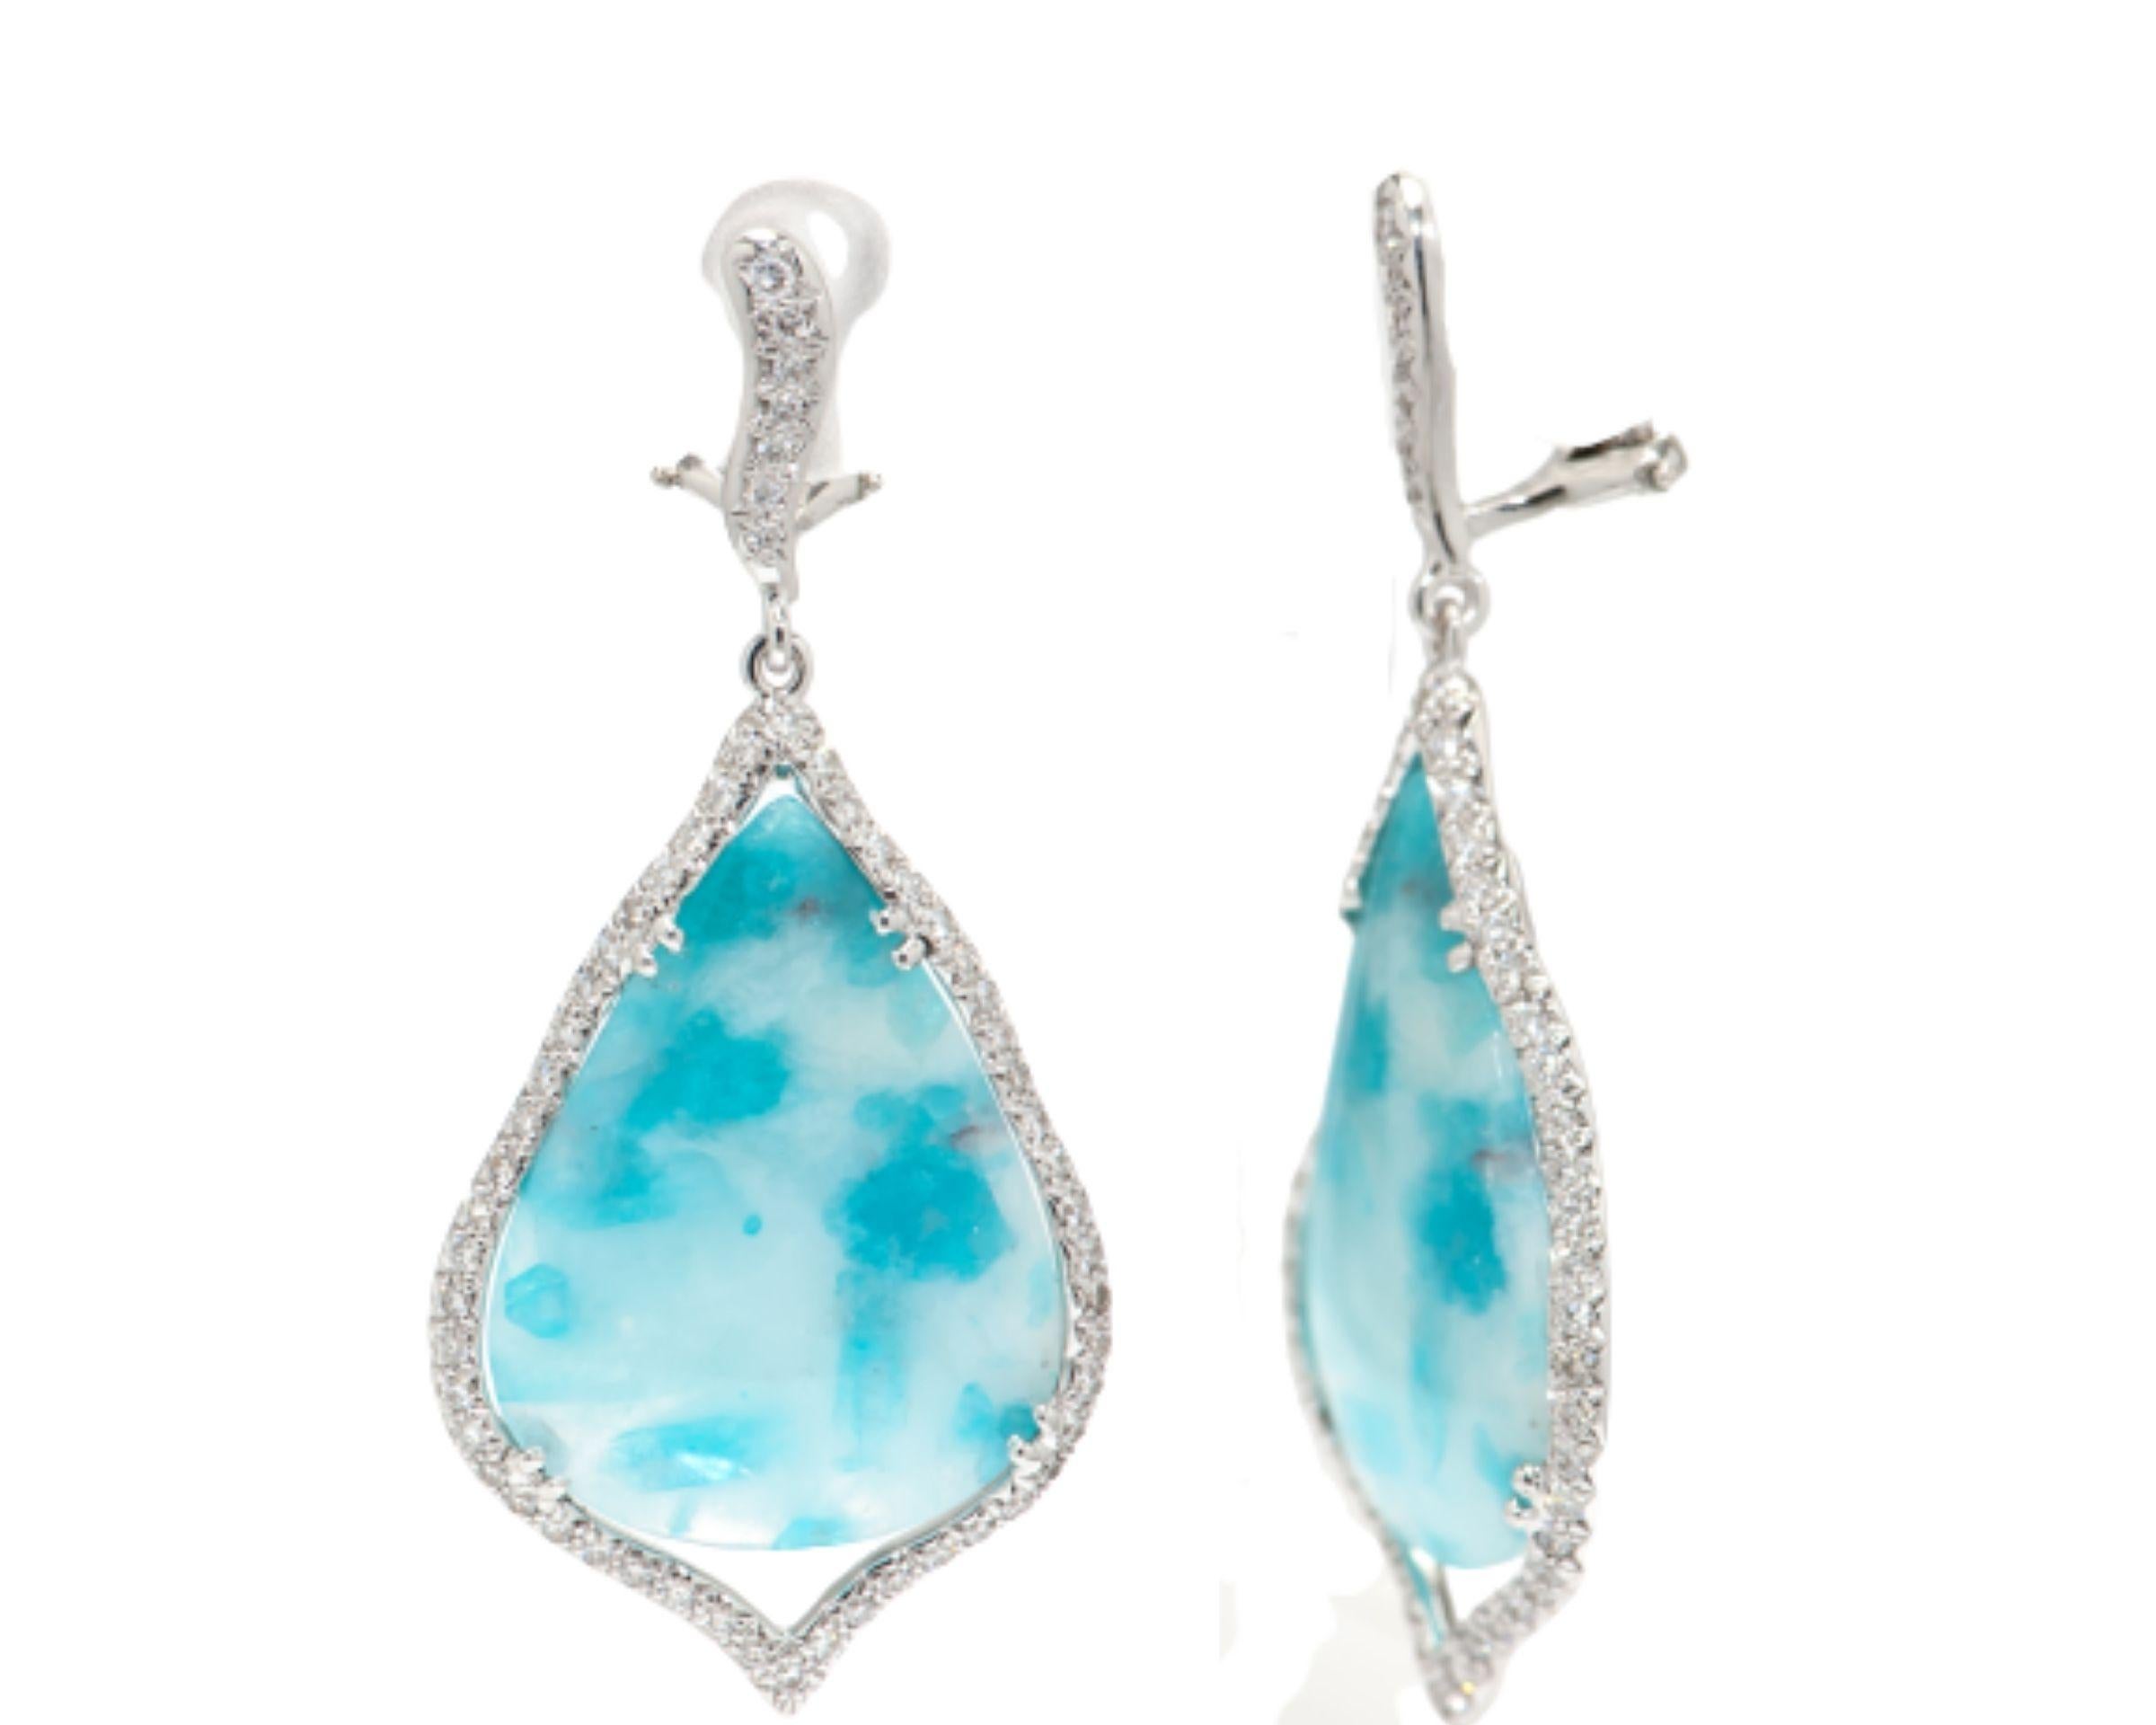 Beautiful pair of Chandelier Dangle Earrings set with Tear Drop Paraiba Tourmaline Gemstones from Brazil; measuring approx. 33.14 x 21.04mm and 26.63 x 19.74mm, surrounded by round brilliant cut diamonds. Hand crafted in 18K white Gold. Classic and